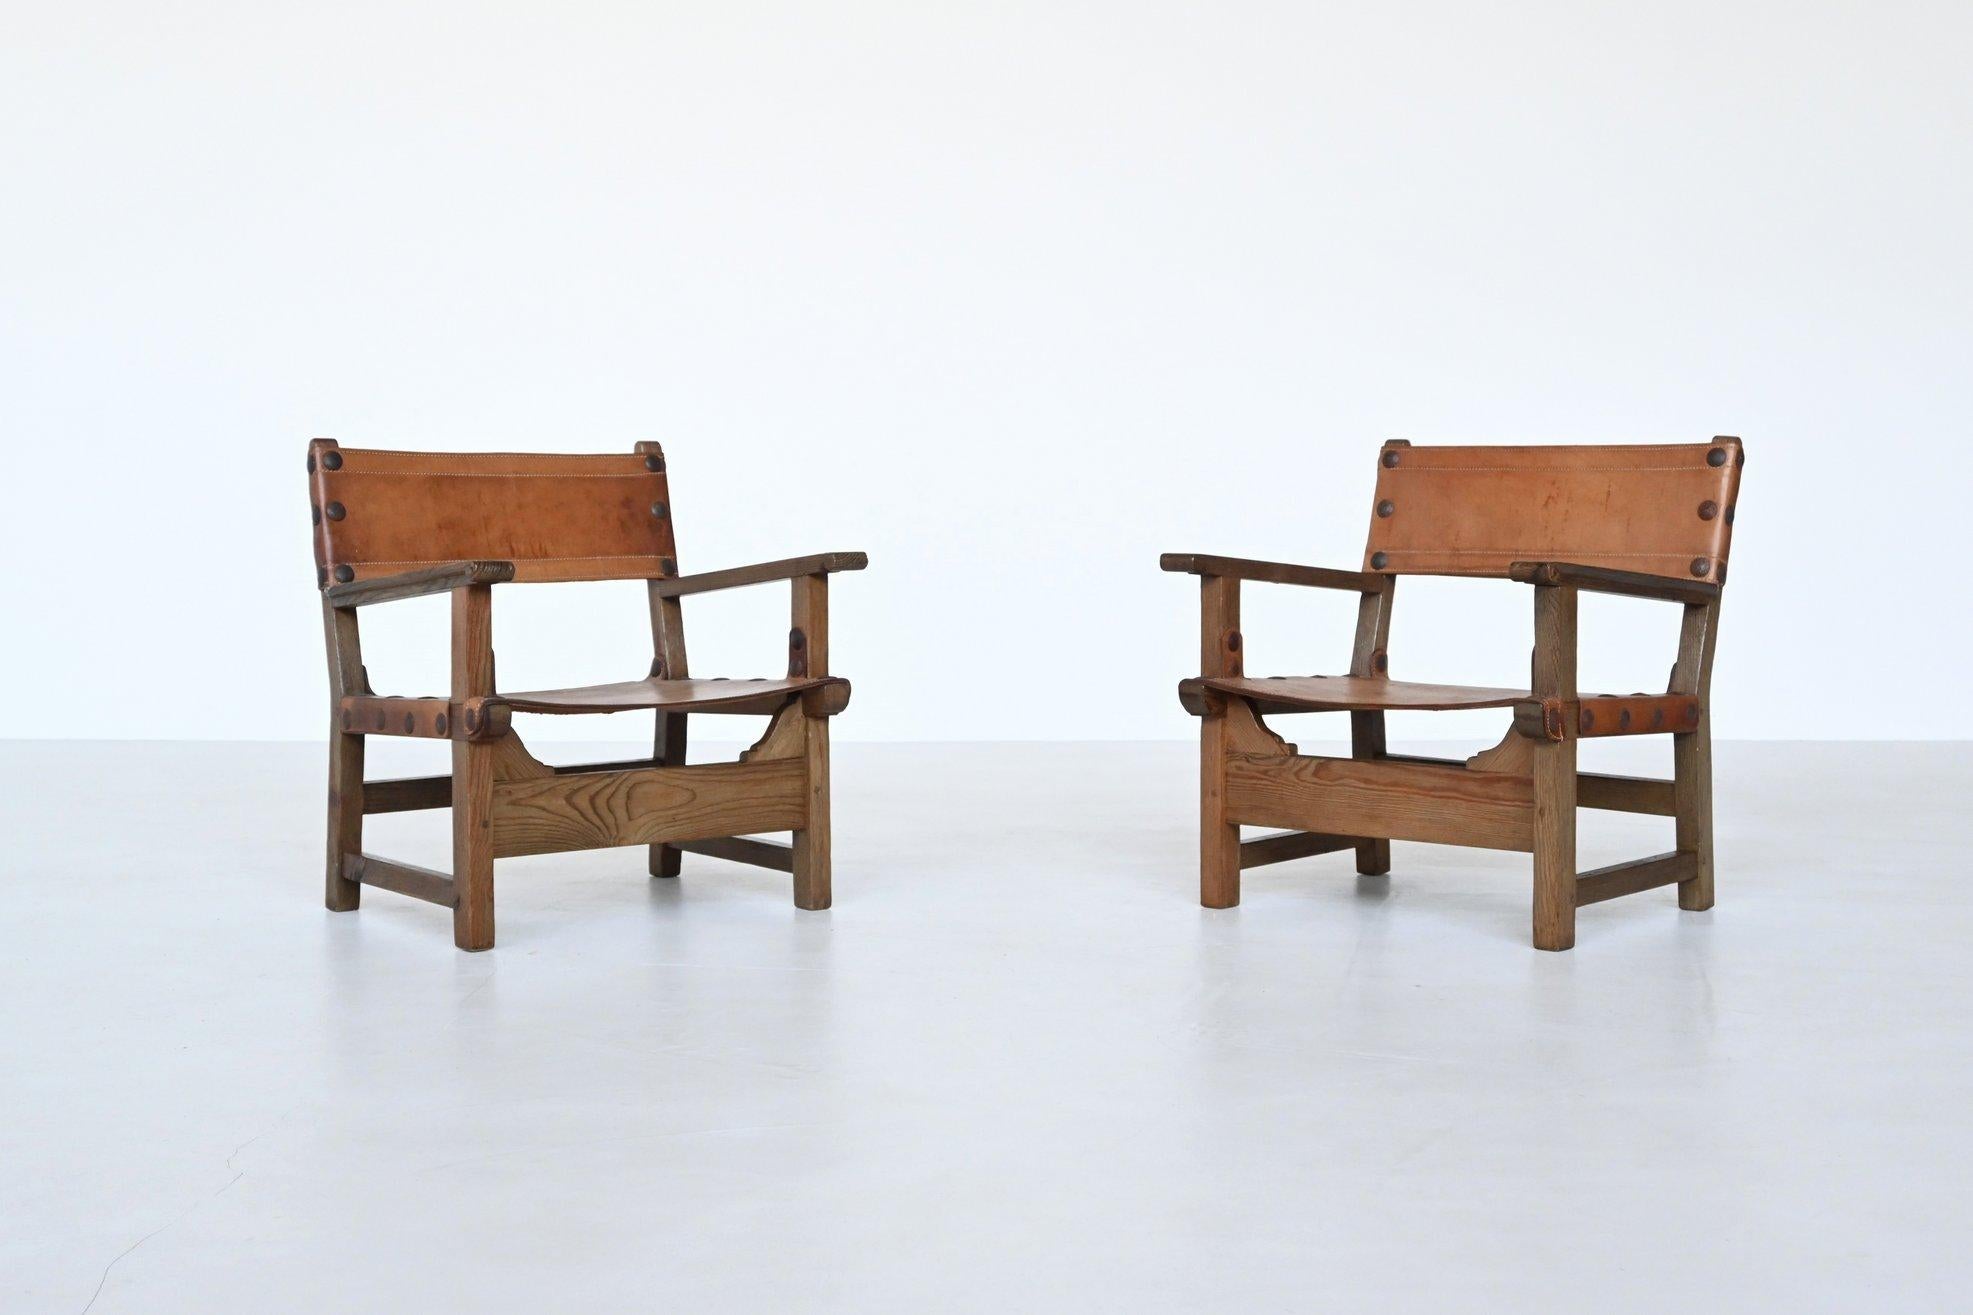 Stunning pair of “Spanish” lounge chairs by unknown designer or manufacturer, Spain 1960. These beautiful shaped chairs are made of solid oak wood with beautiful natural saddle leather. The leather is still original and has a very nice patina due